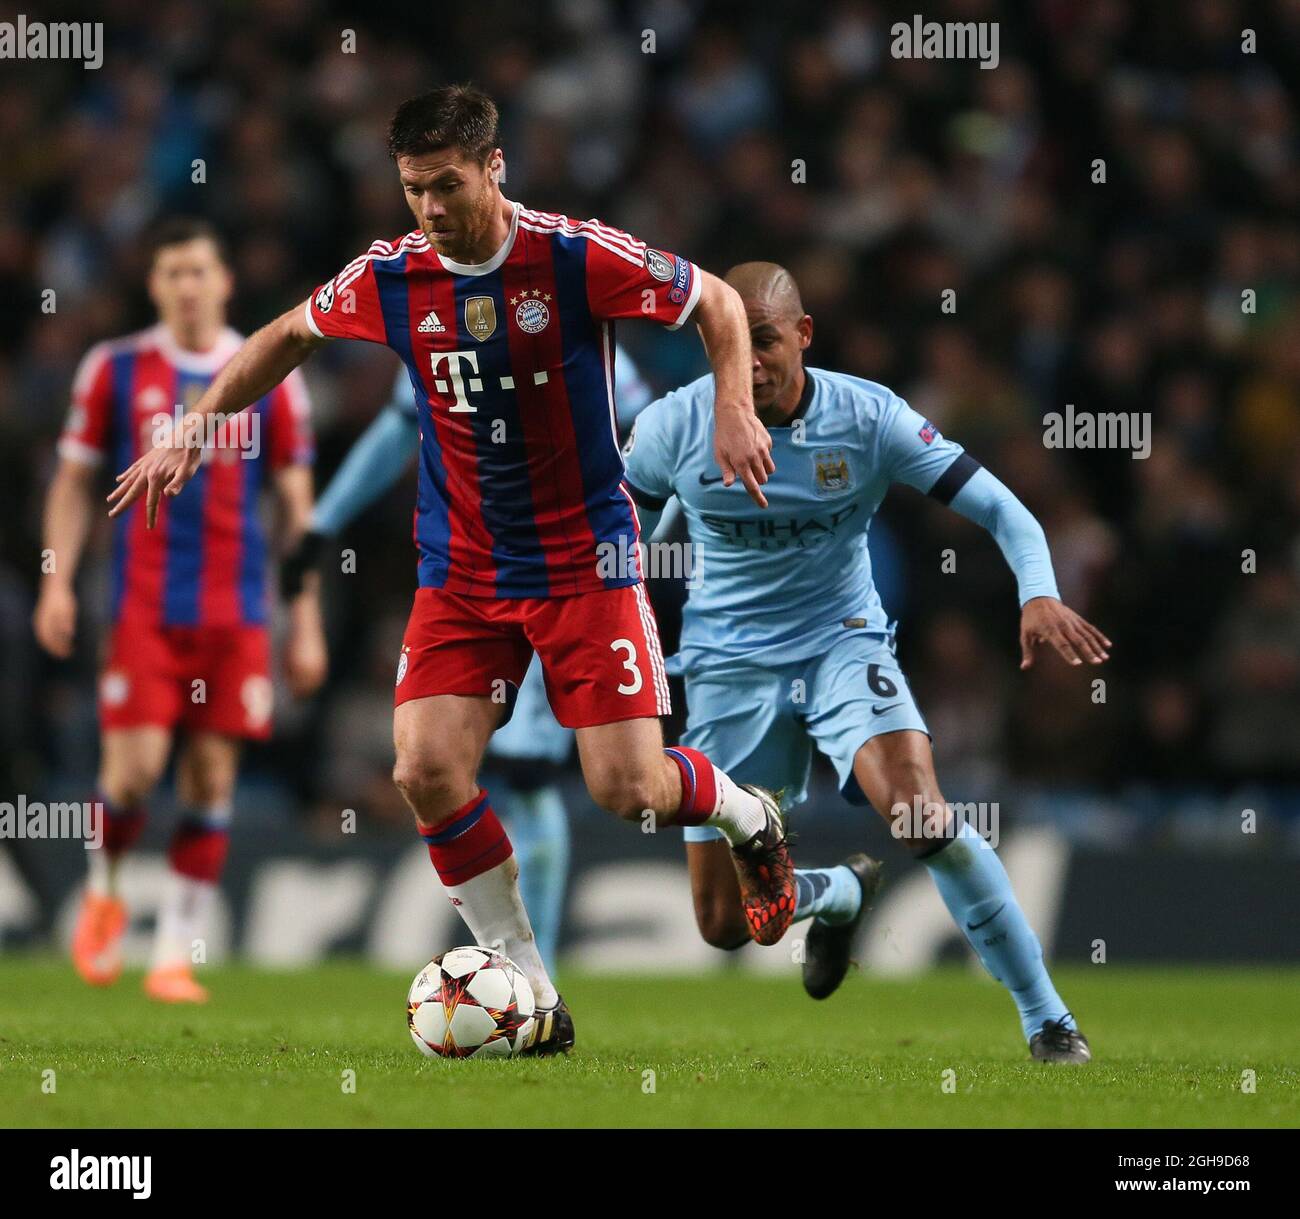 Fernando of Manchester City and Xabi Alonso of Bayern Munich during the Champions League Group E match between Manchester City and Bayern Munich held at Etihad Stadium in England on Nov. 25, 2014. Stock Photo